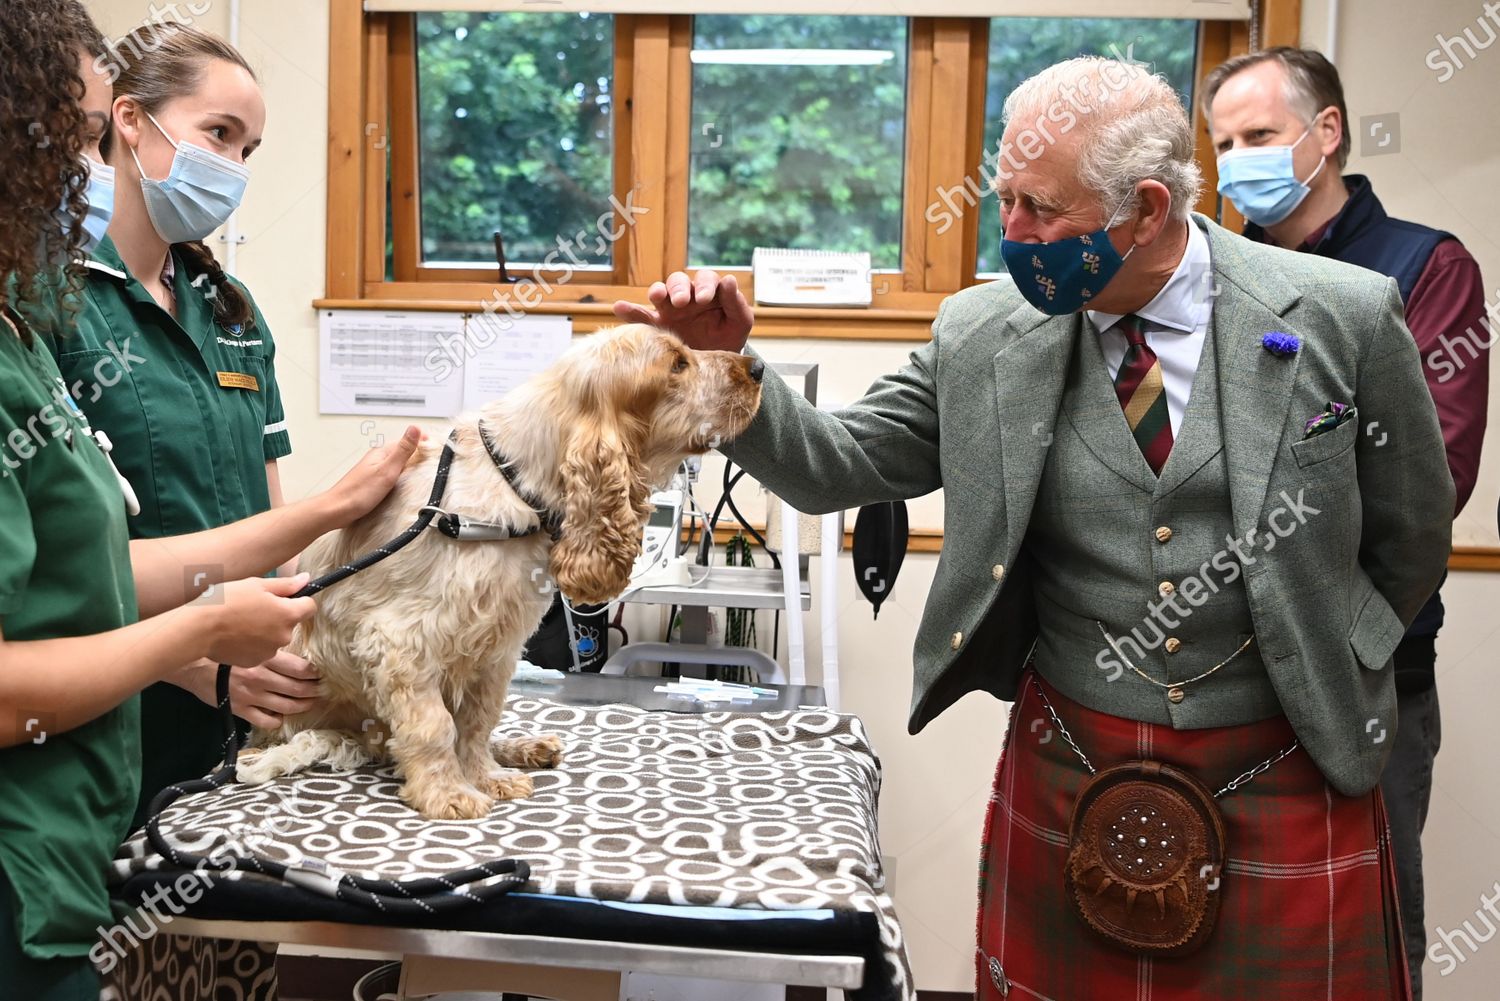 prince-charles-visit-to-caithness-scotland-uk-shutterstock-editorial-12236892x.jpg